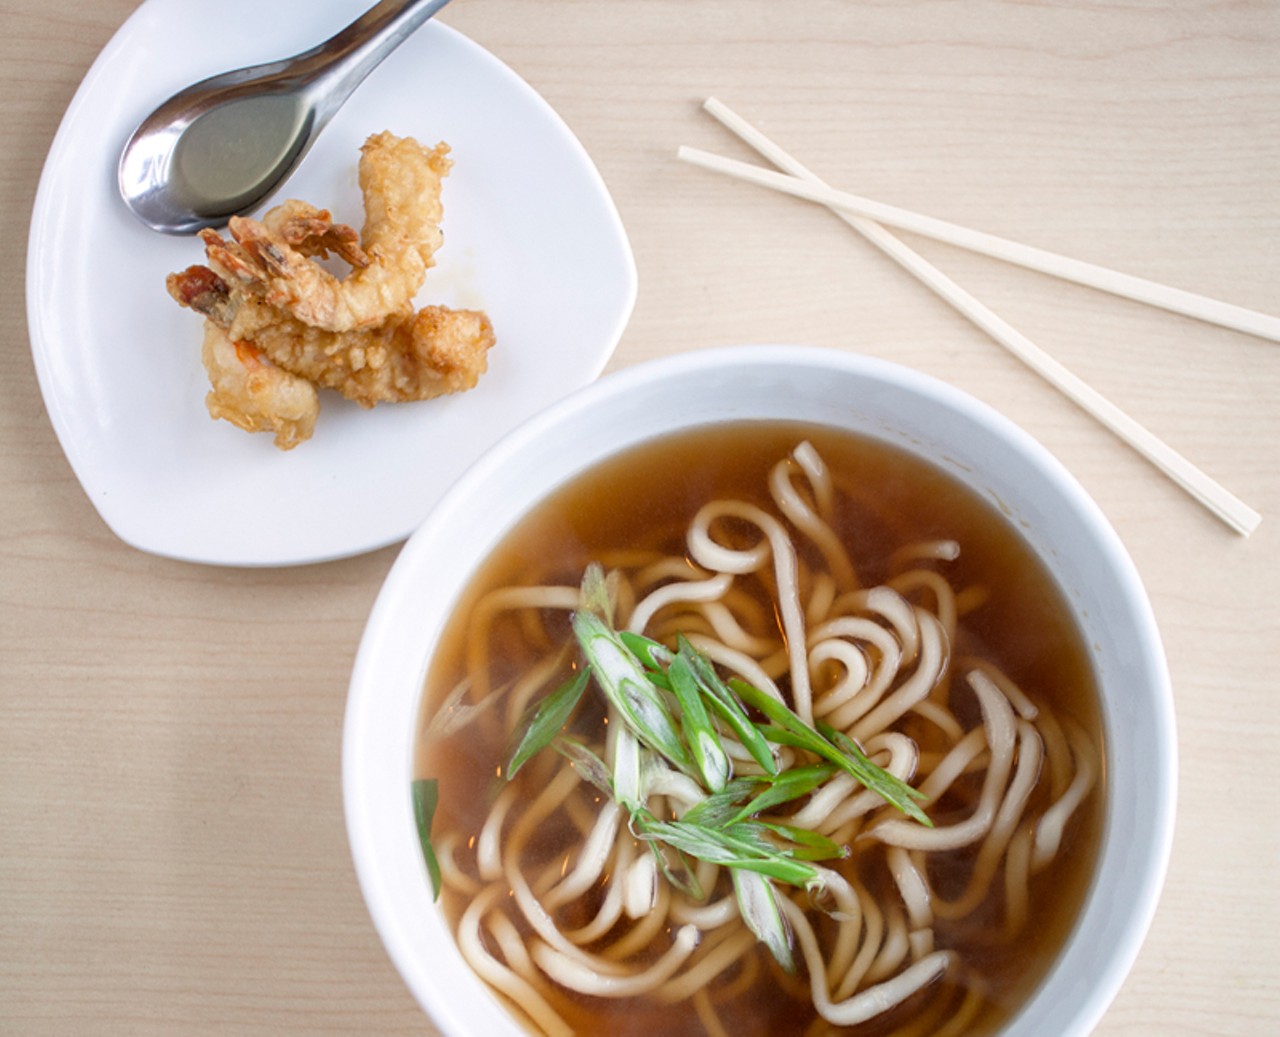 Tempura Udon Soup is served in a light soy broth, topped with green onions and served with tempura shrimp.